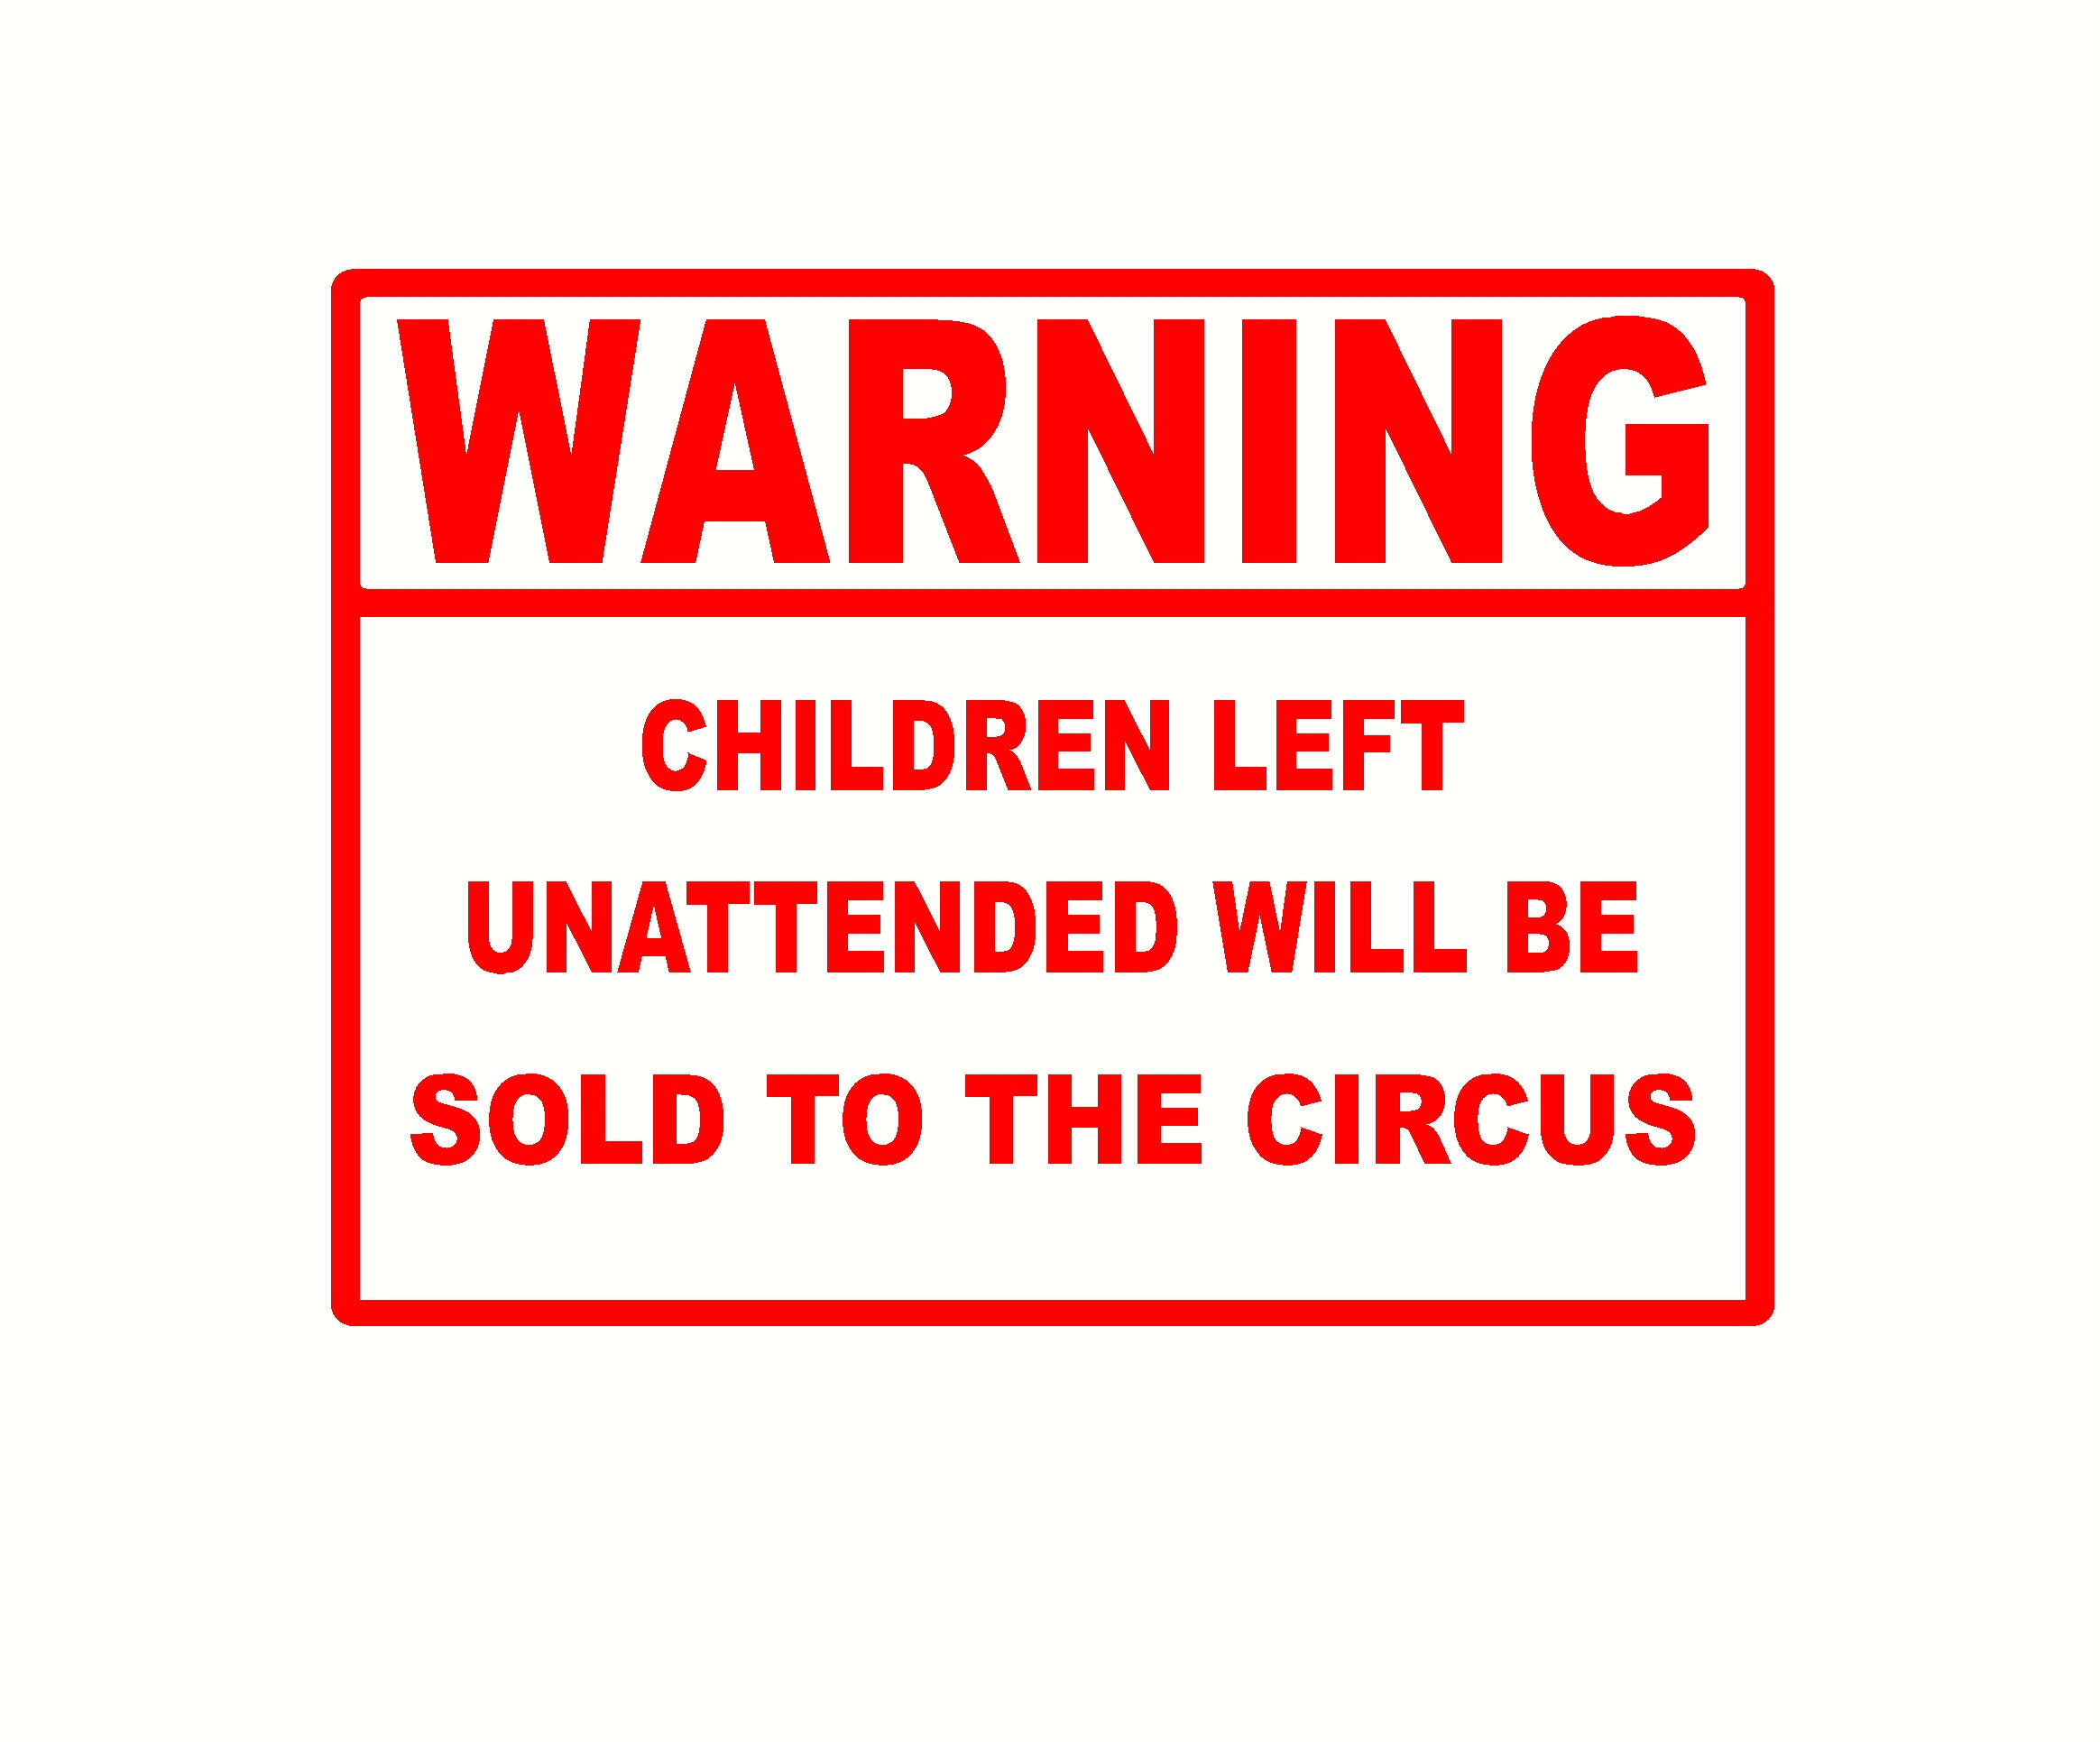 Children Left Unattended Sold to Circus Warning Stickers Set of 2 Decals 4"WS467 